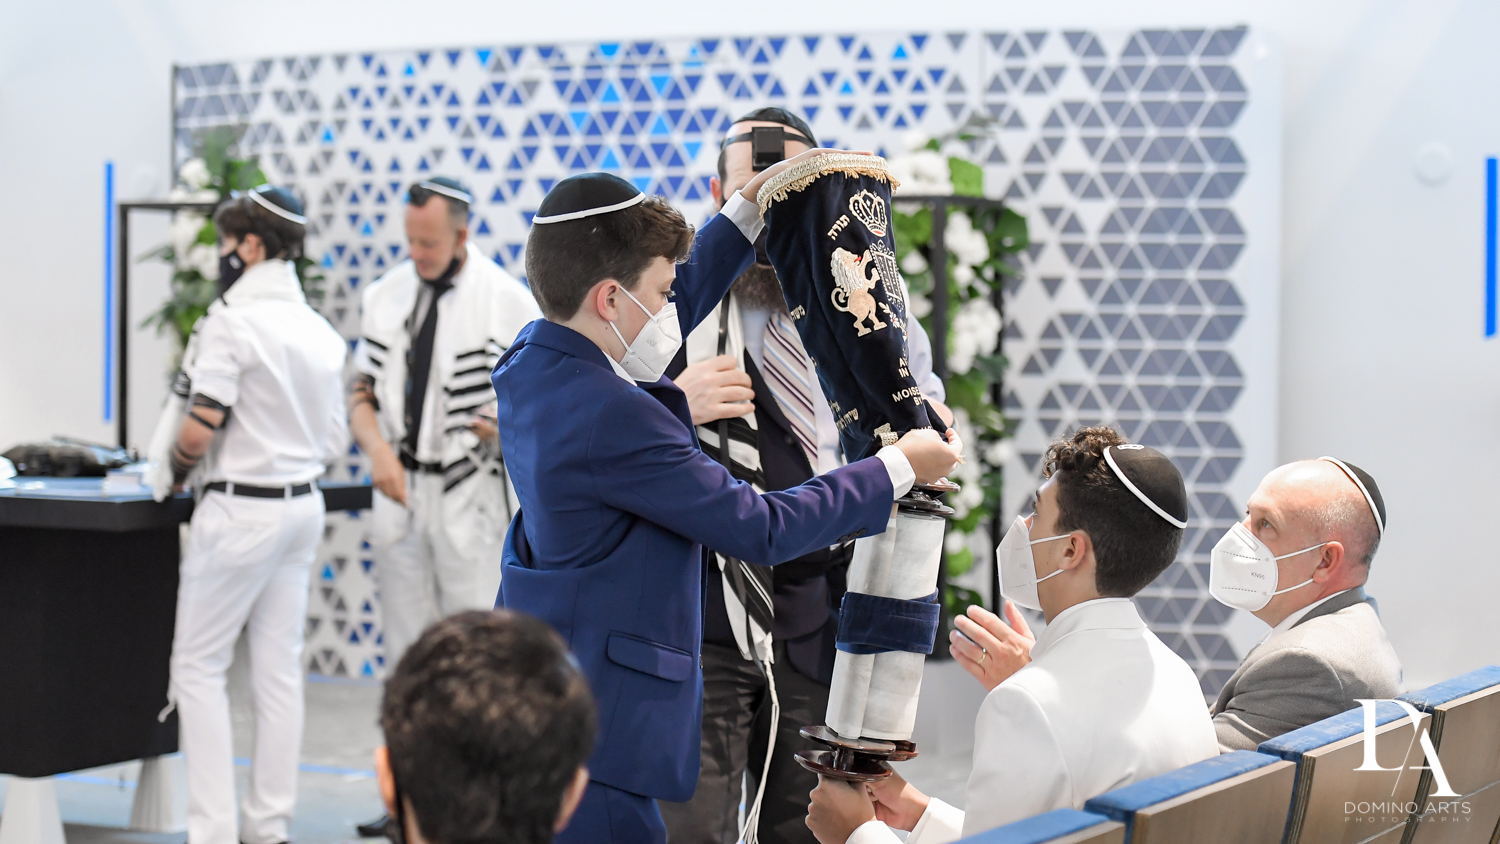 Monochrome Bar Mitzvah Ceremony at Aventura Chabad by Domino Arts Photography